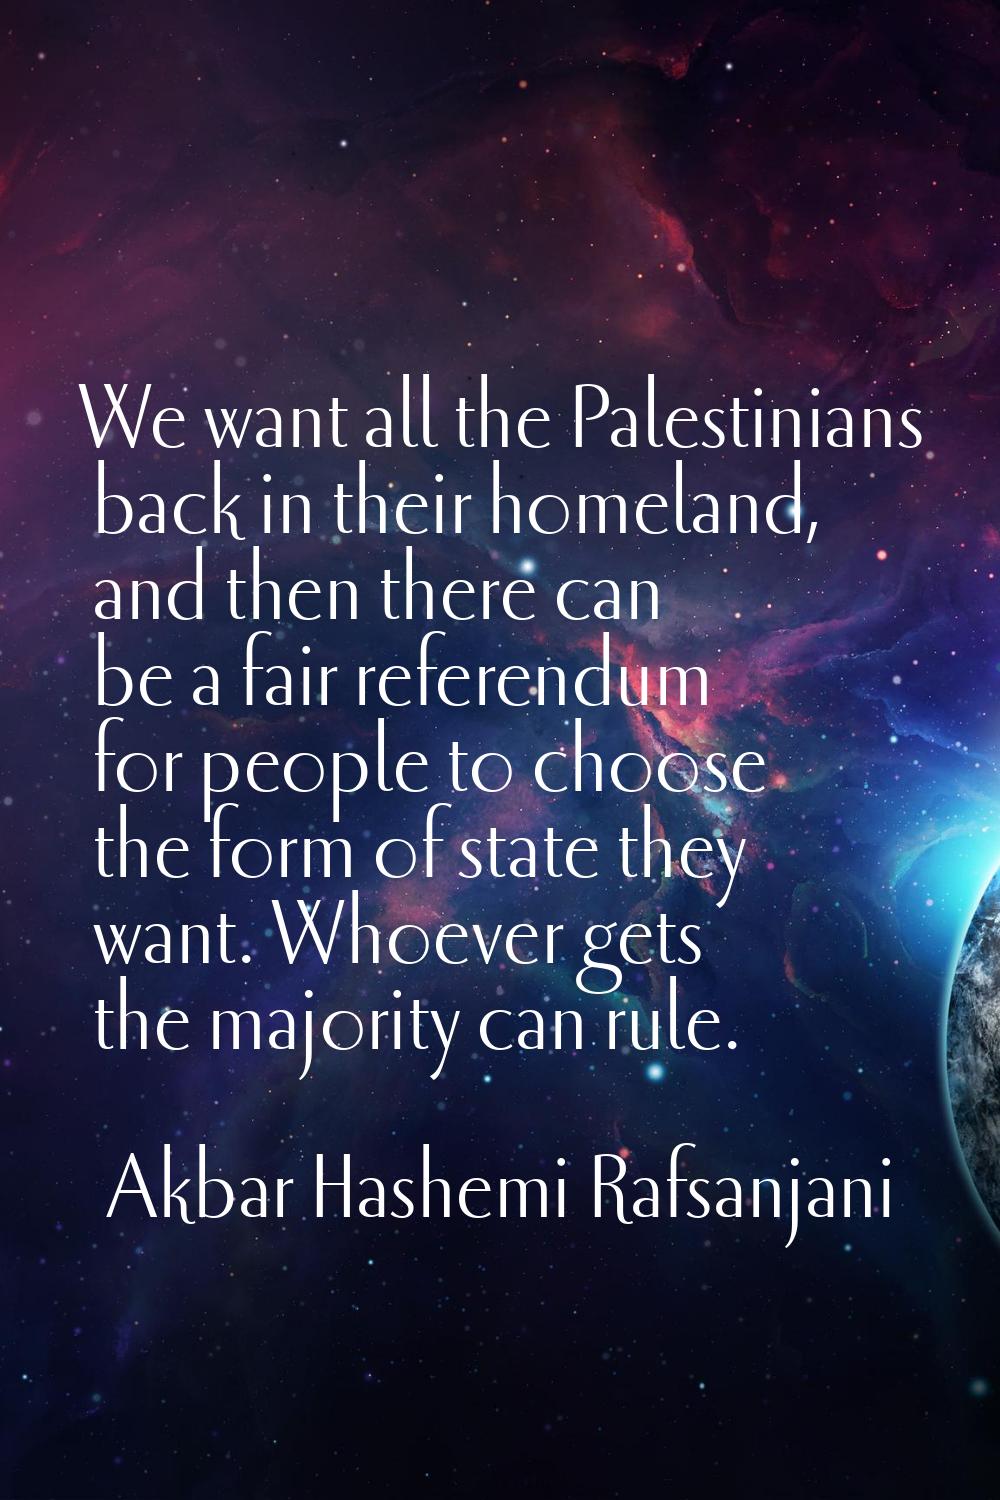 We want all the Palestinians back in their homeland, and then there can be a fair referendum for pe